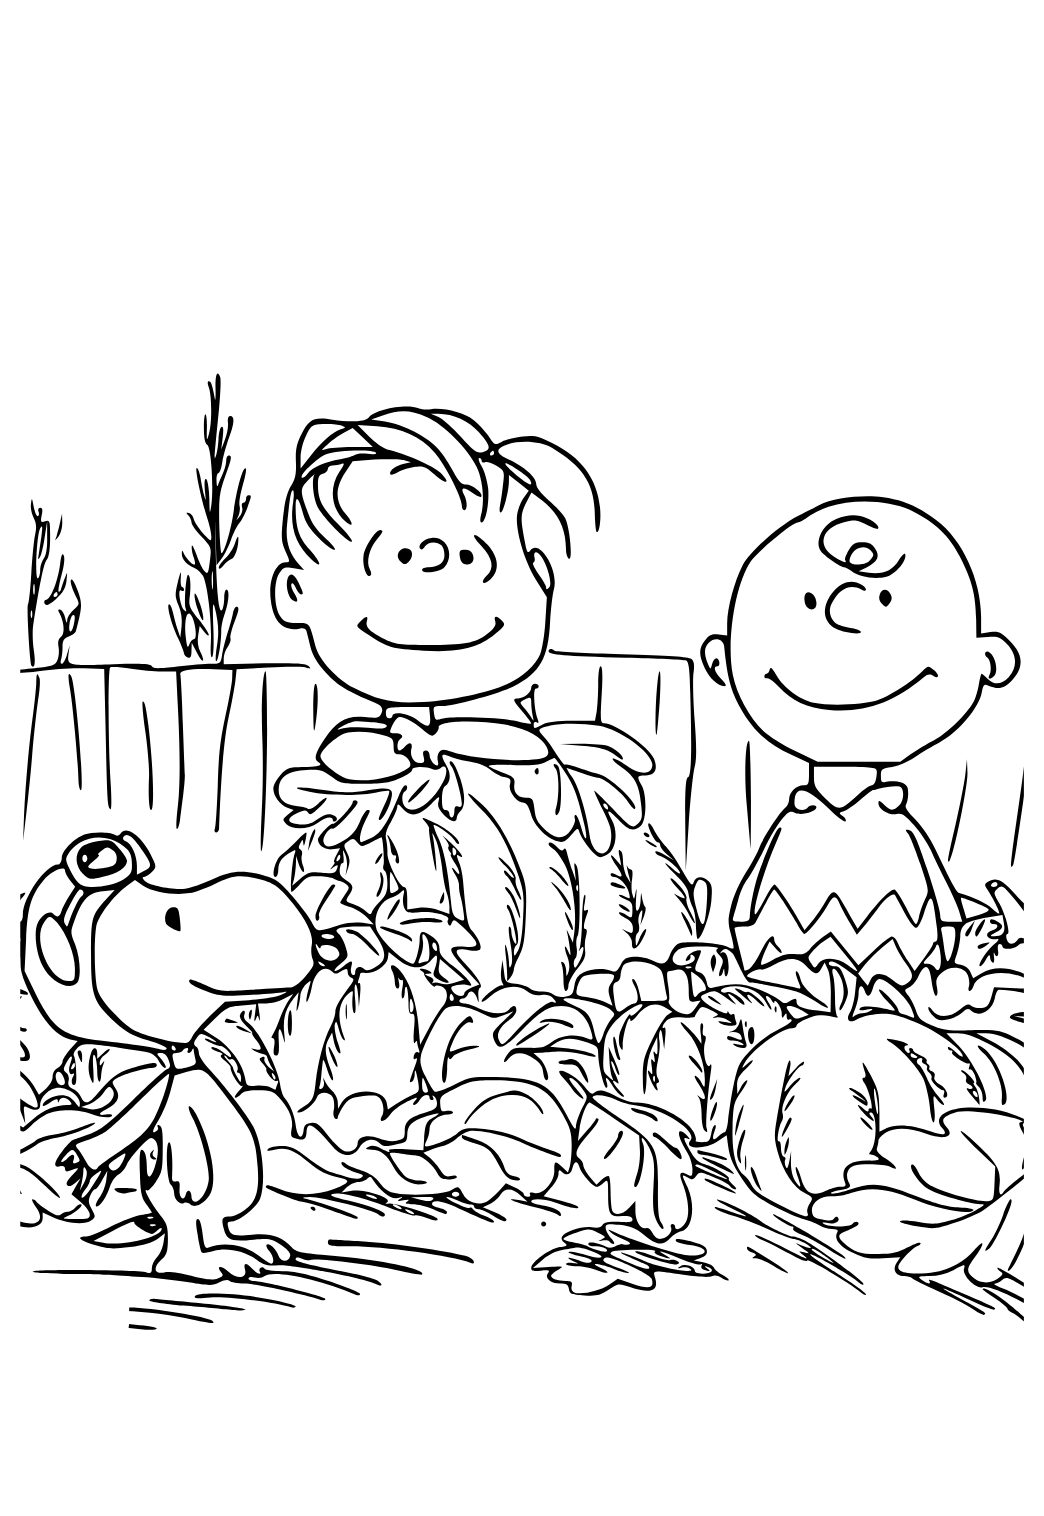 Free printable charlie brown characters coloring page for adults and kids